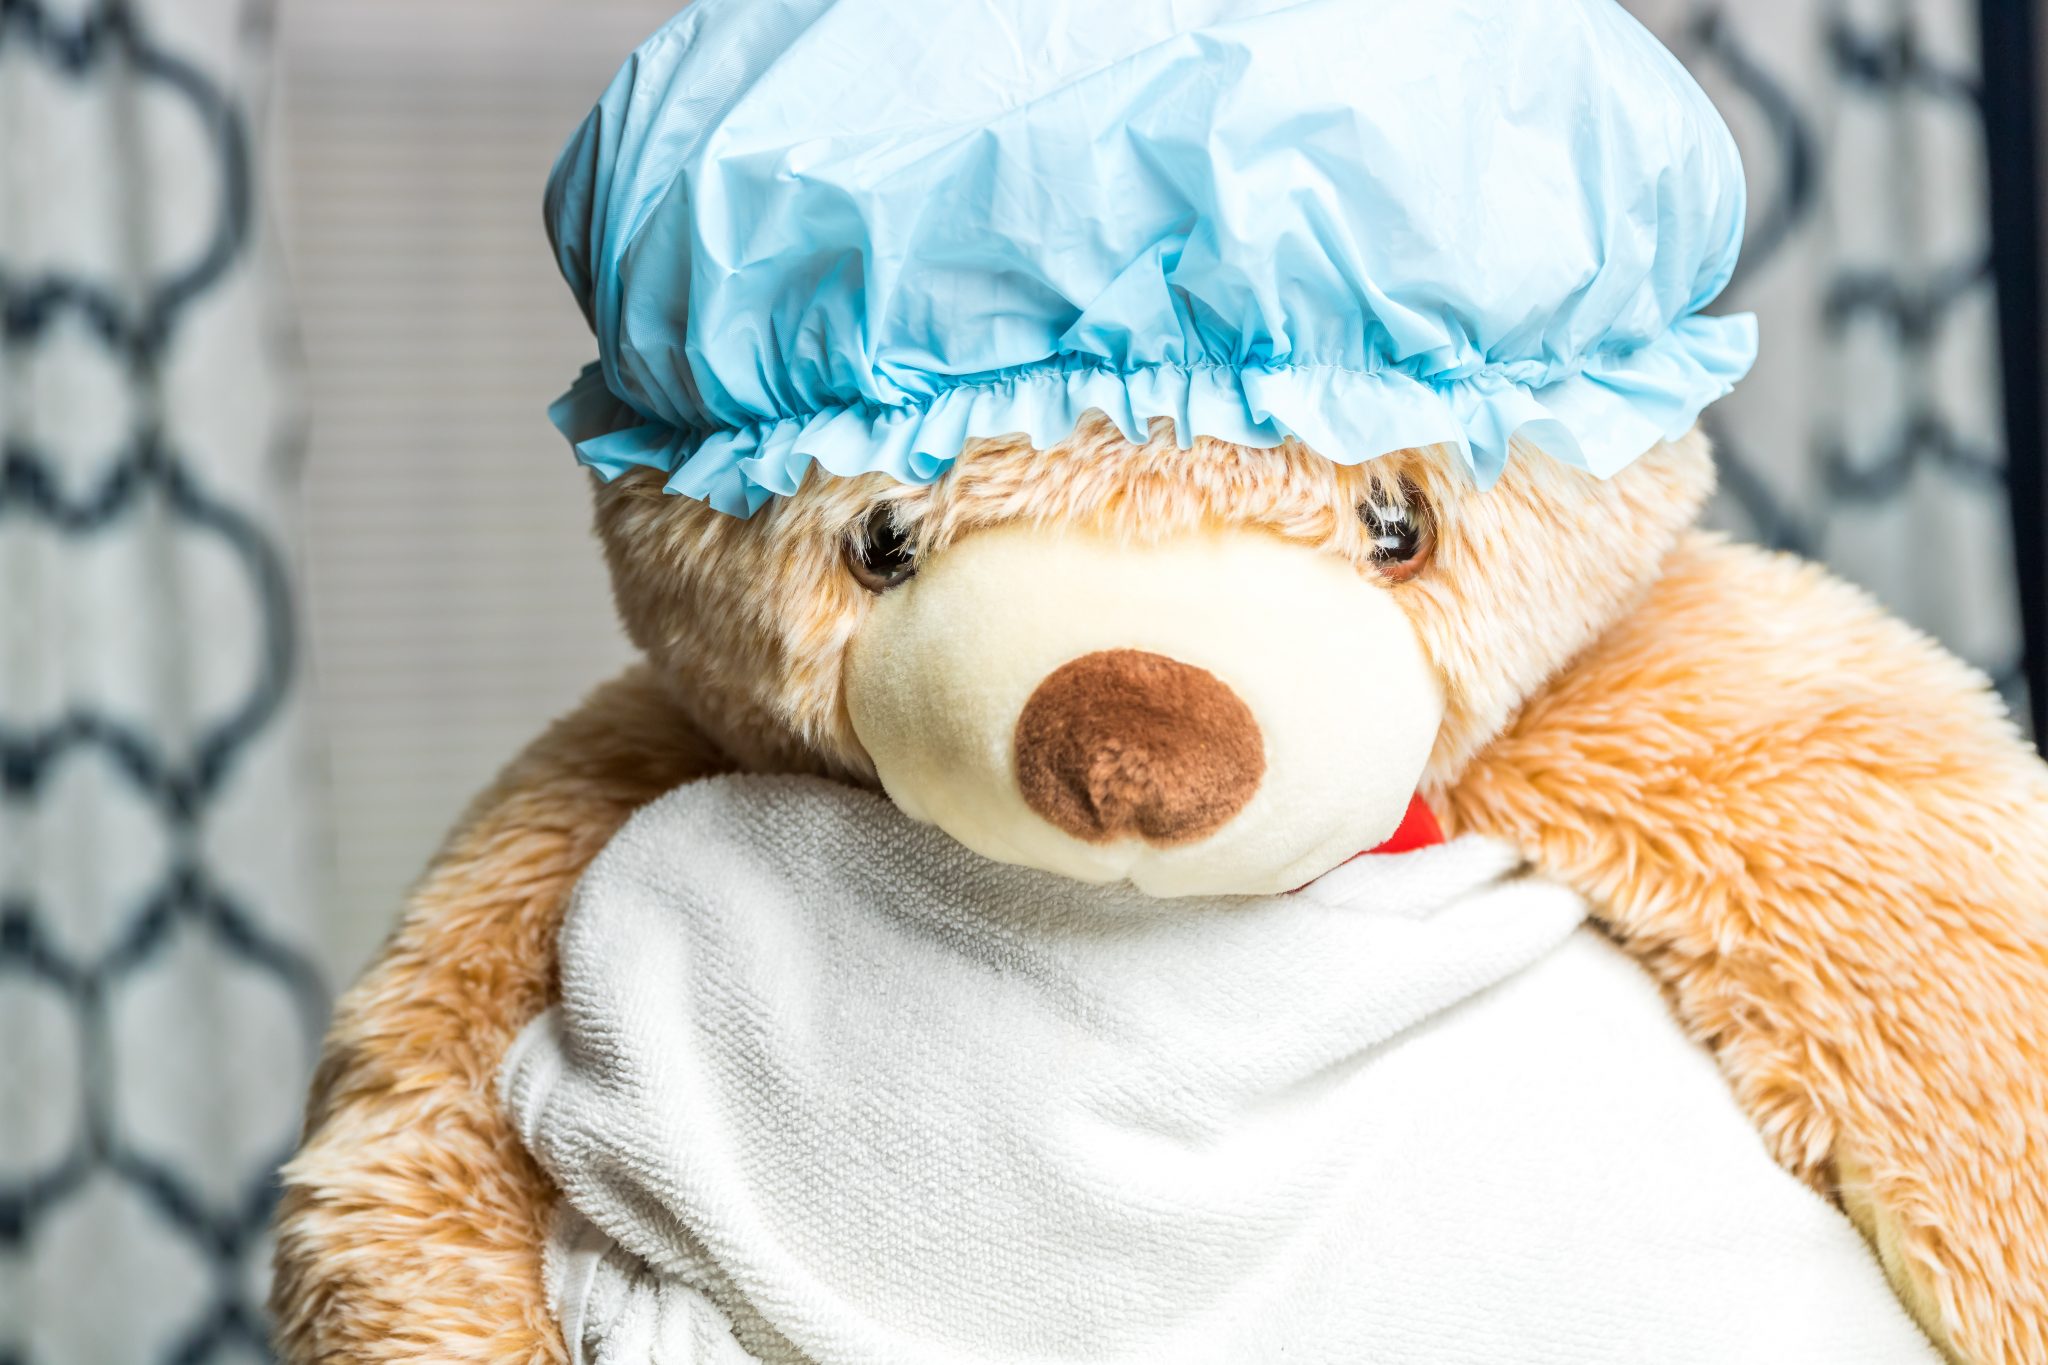 Musings: My daughter won’t shower without her teddy so this is what I’ve had to do